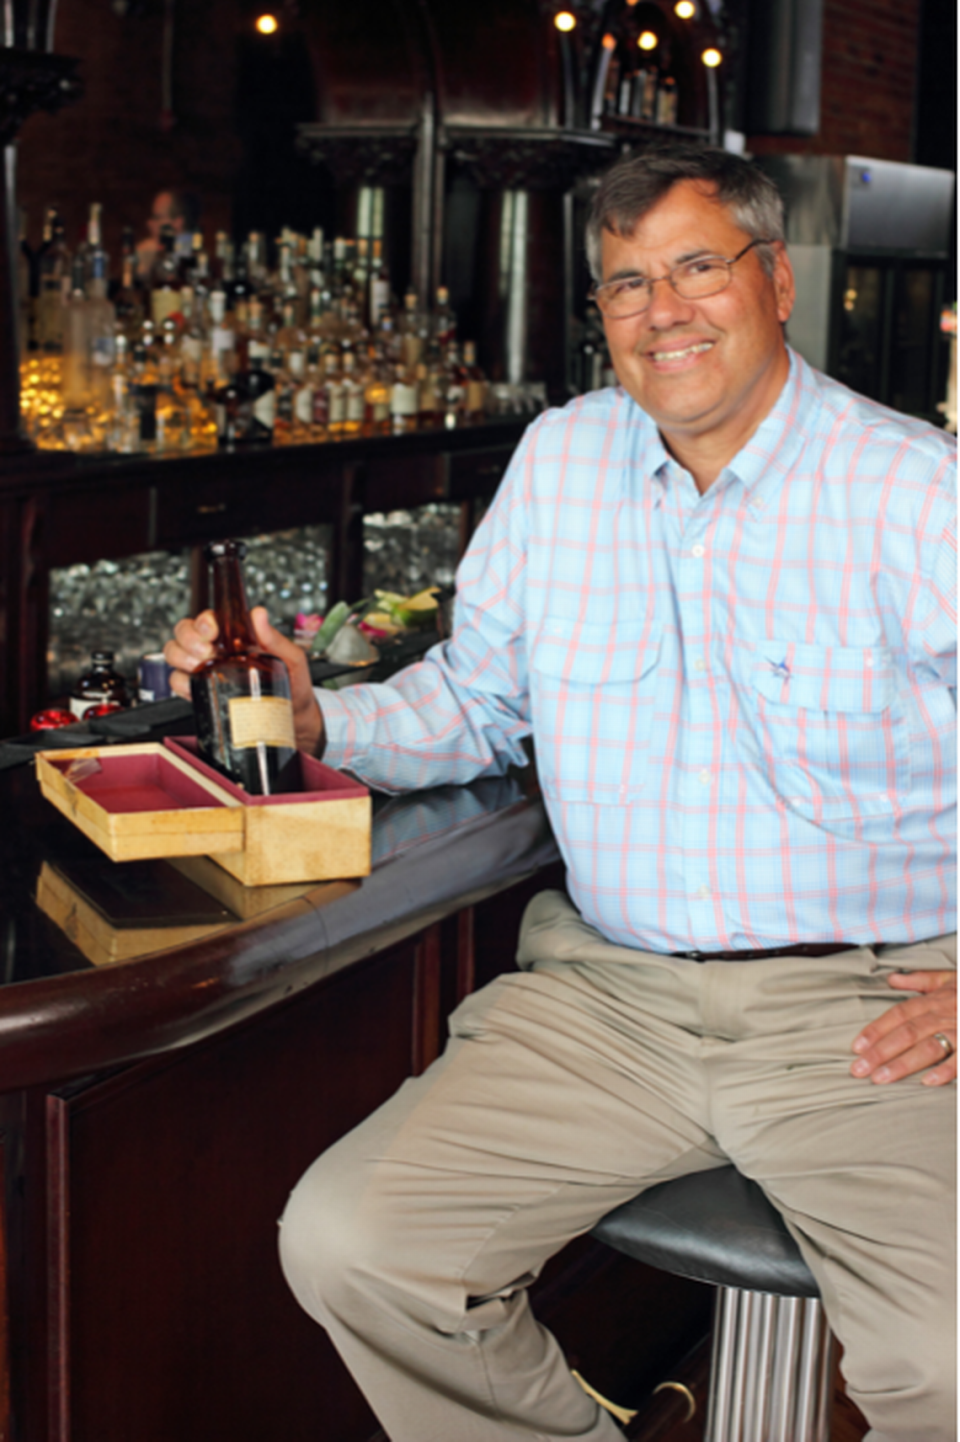 South Carolinian Rex Woolbright found the bottle of whiskey when going through his uncle’s estate.